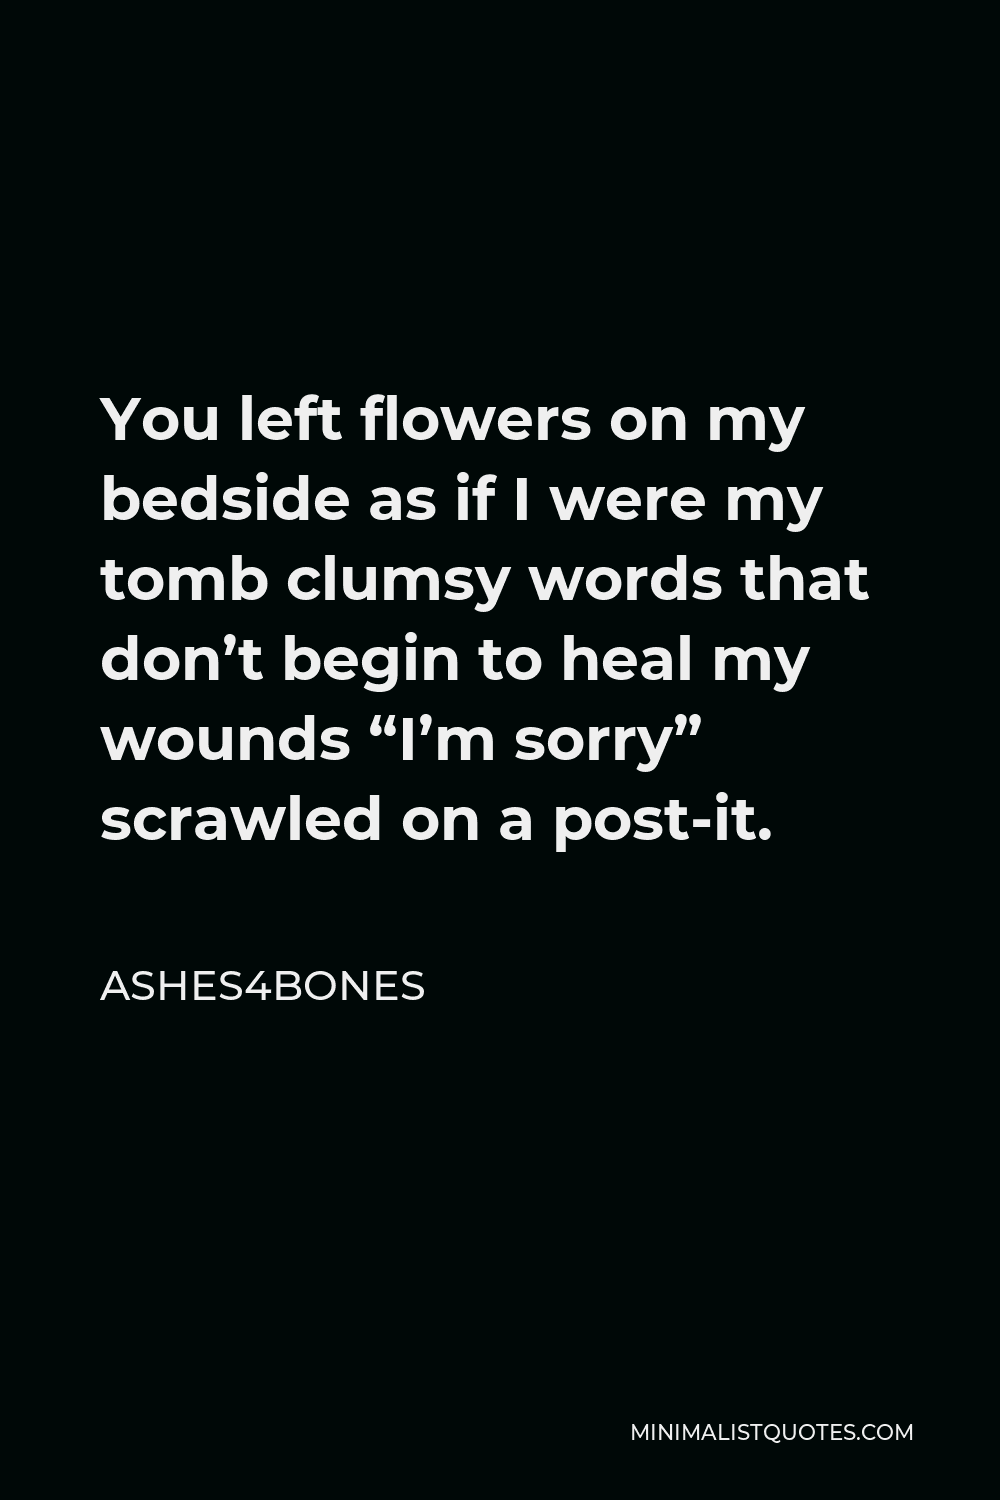 Ashes4bones Quote - You left flowers on my bedside as if I were my tomb clumsy words that don’t begin to heal my wounds “I’m sorry” scrawled on a post-it.